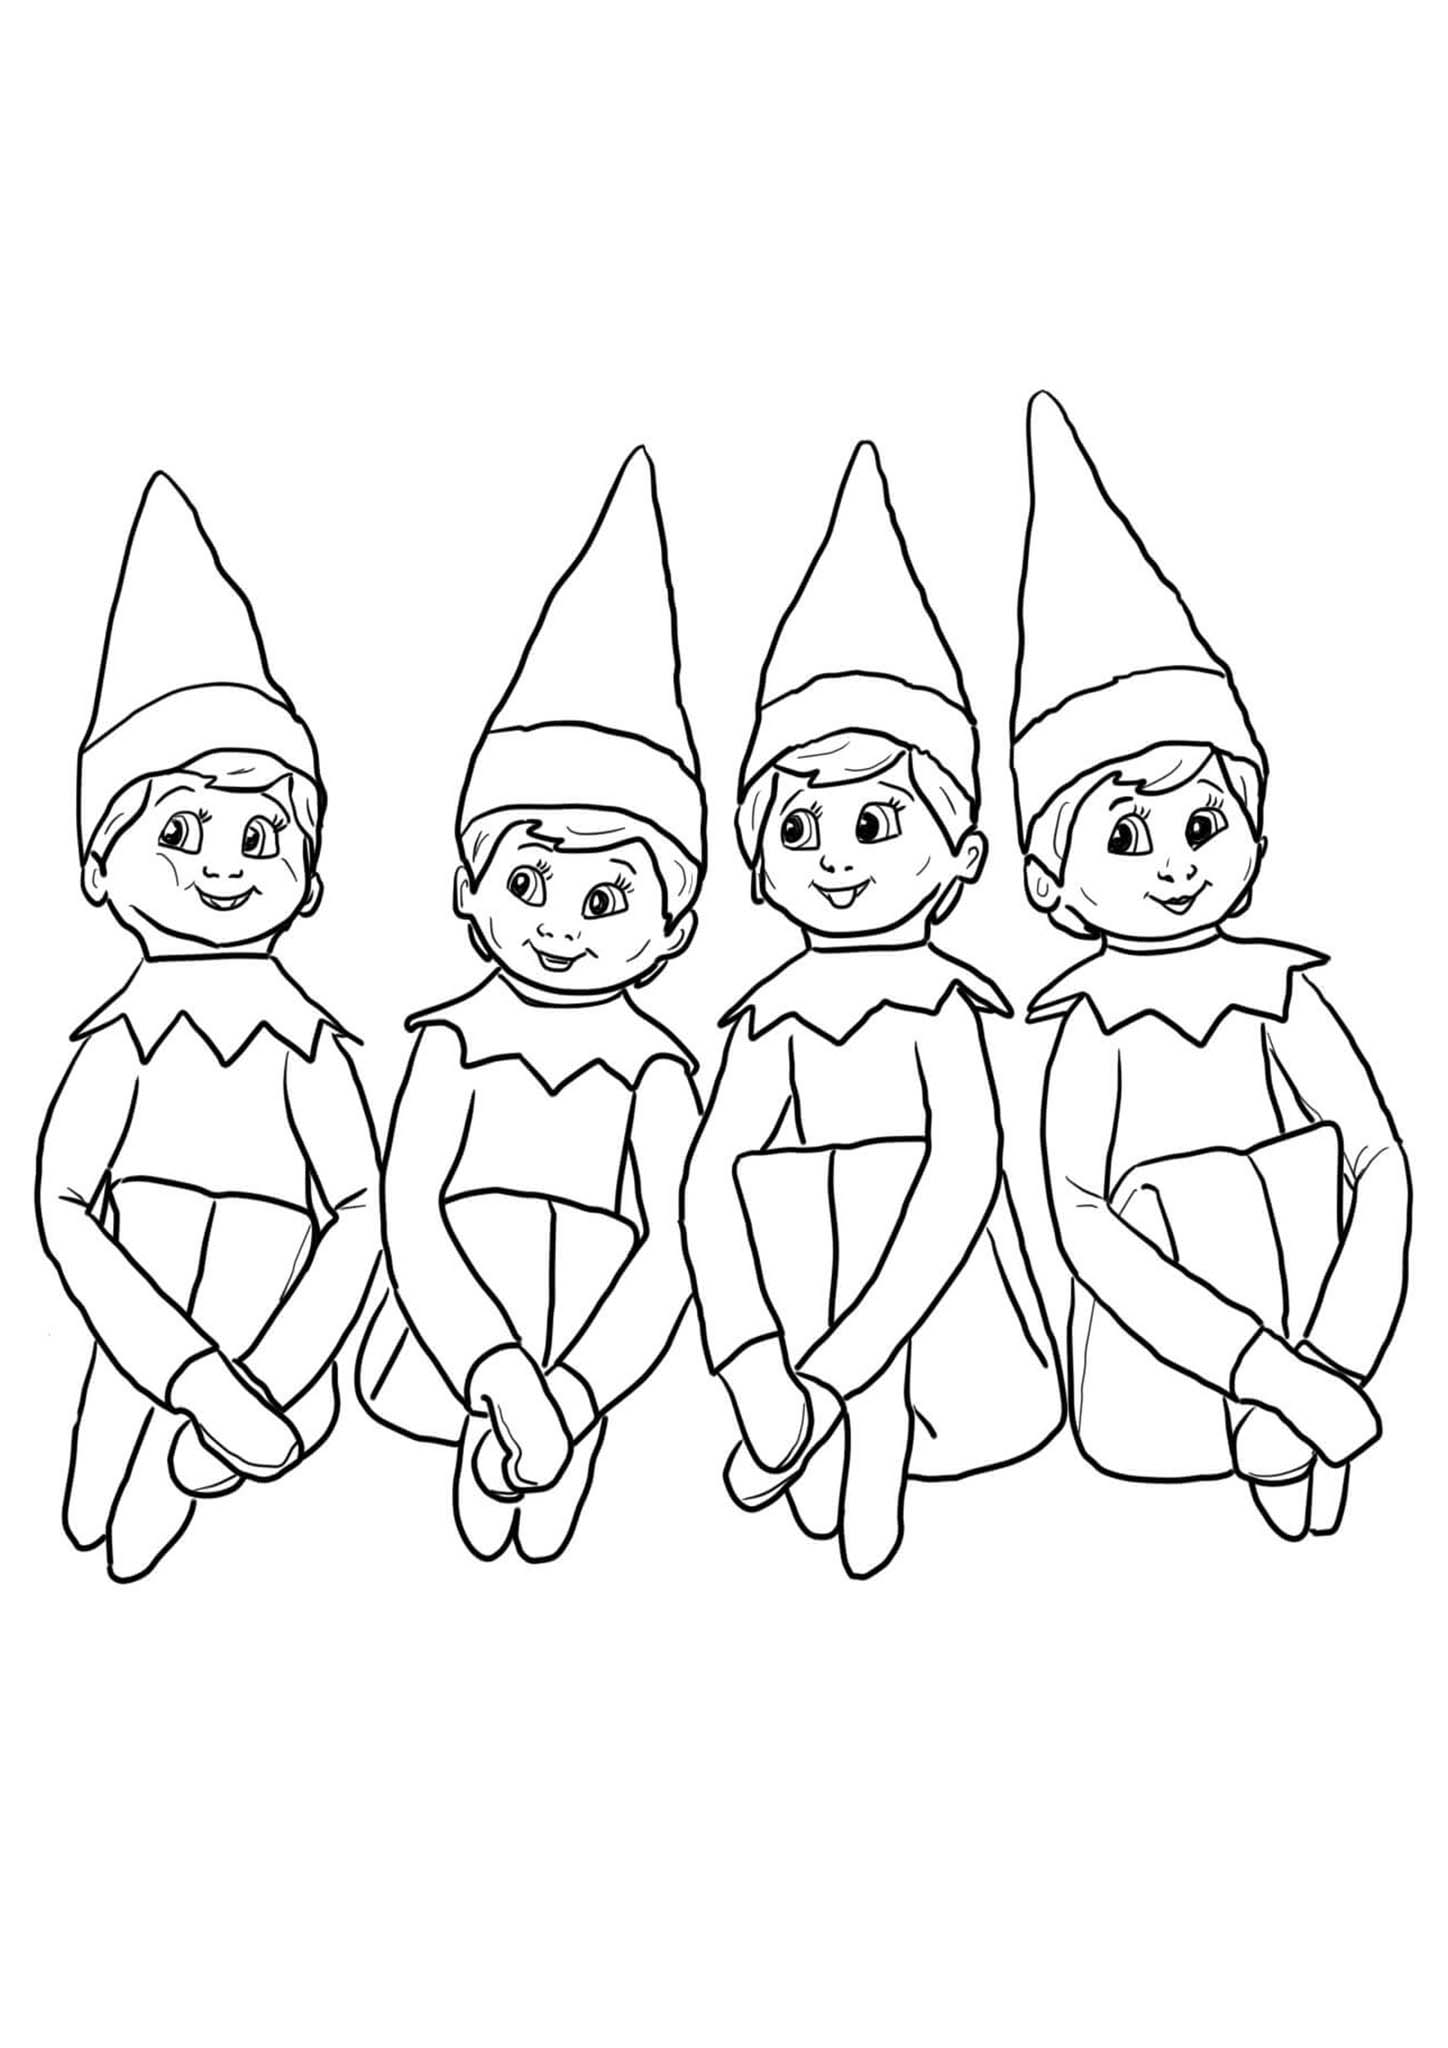 Free Printable Elf on The Shelf Coloring Pages   Tulamama